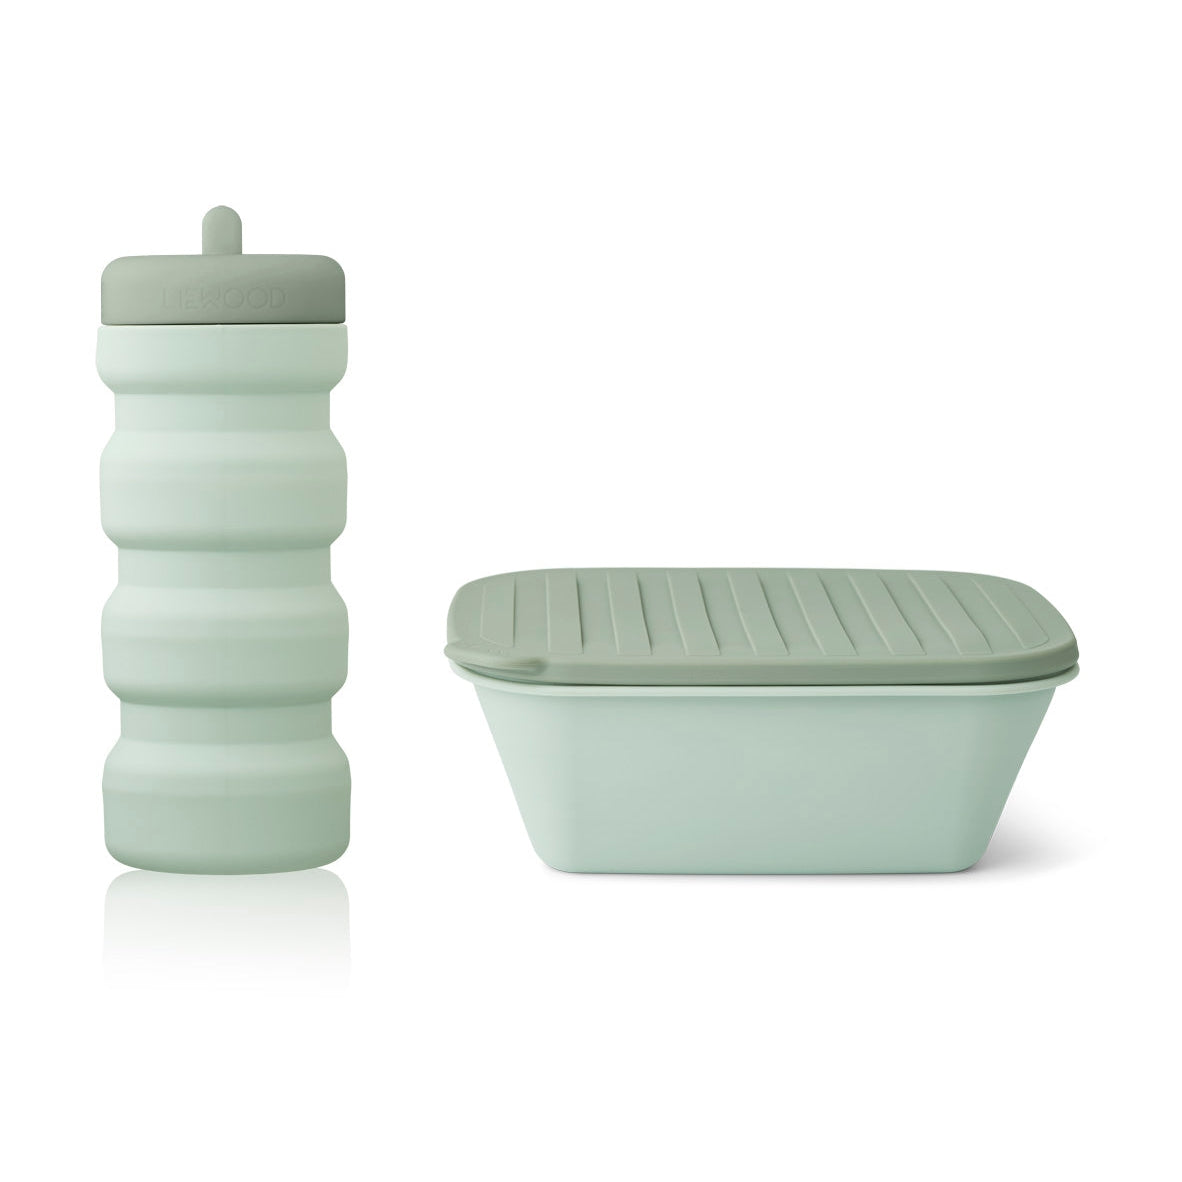 Jose On-The-Go Set - Dusty Mint/Faune Green Mix